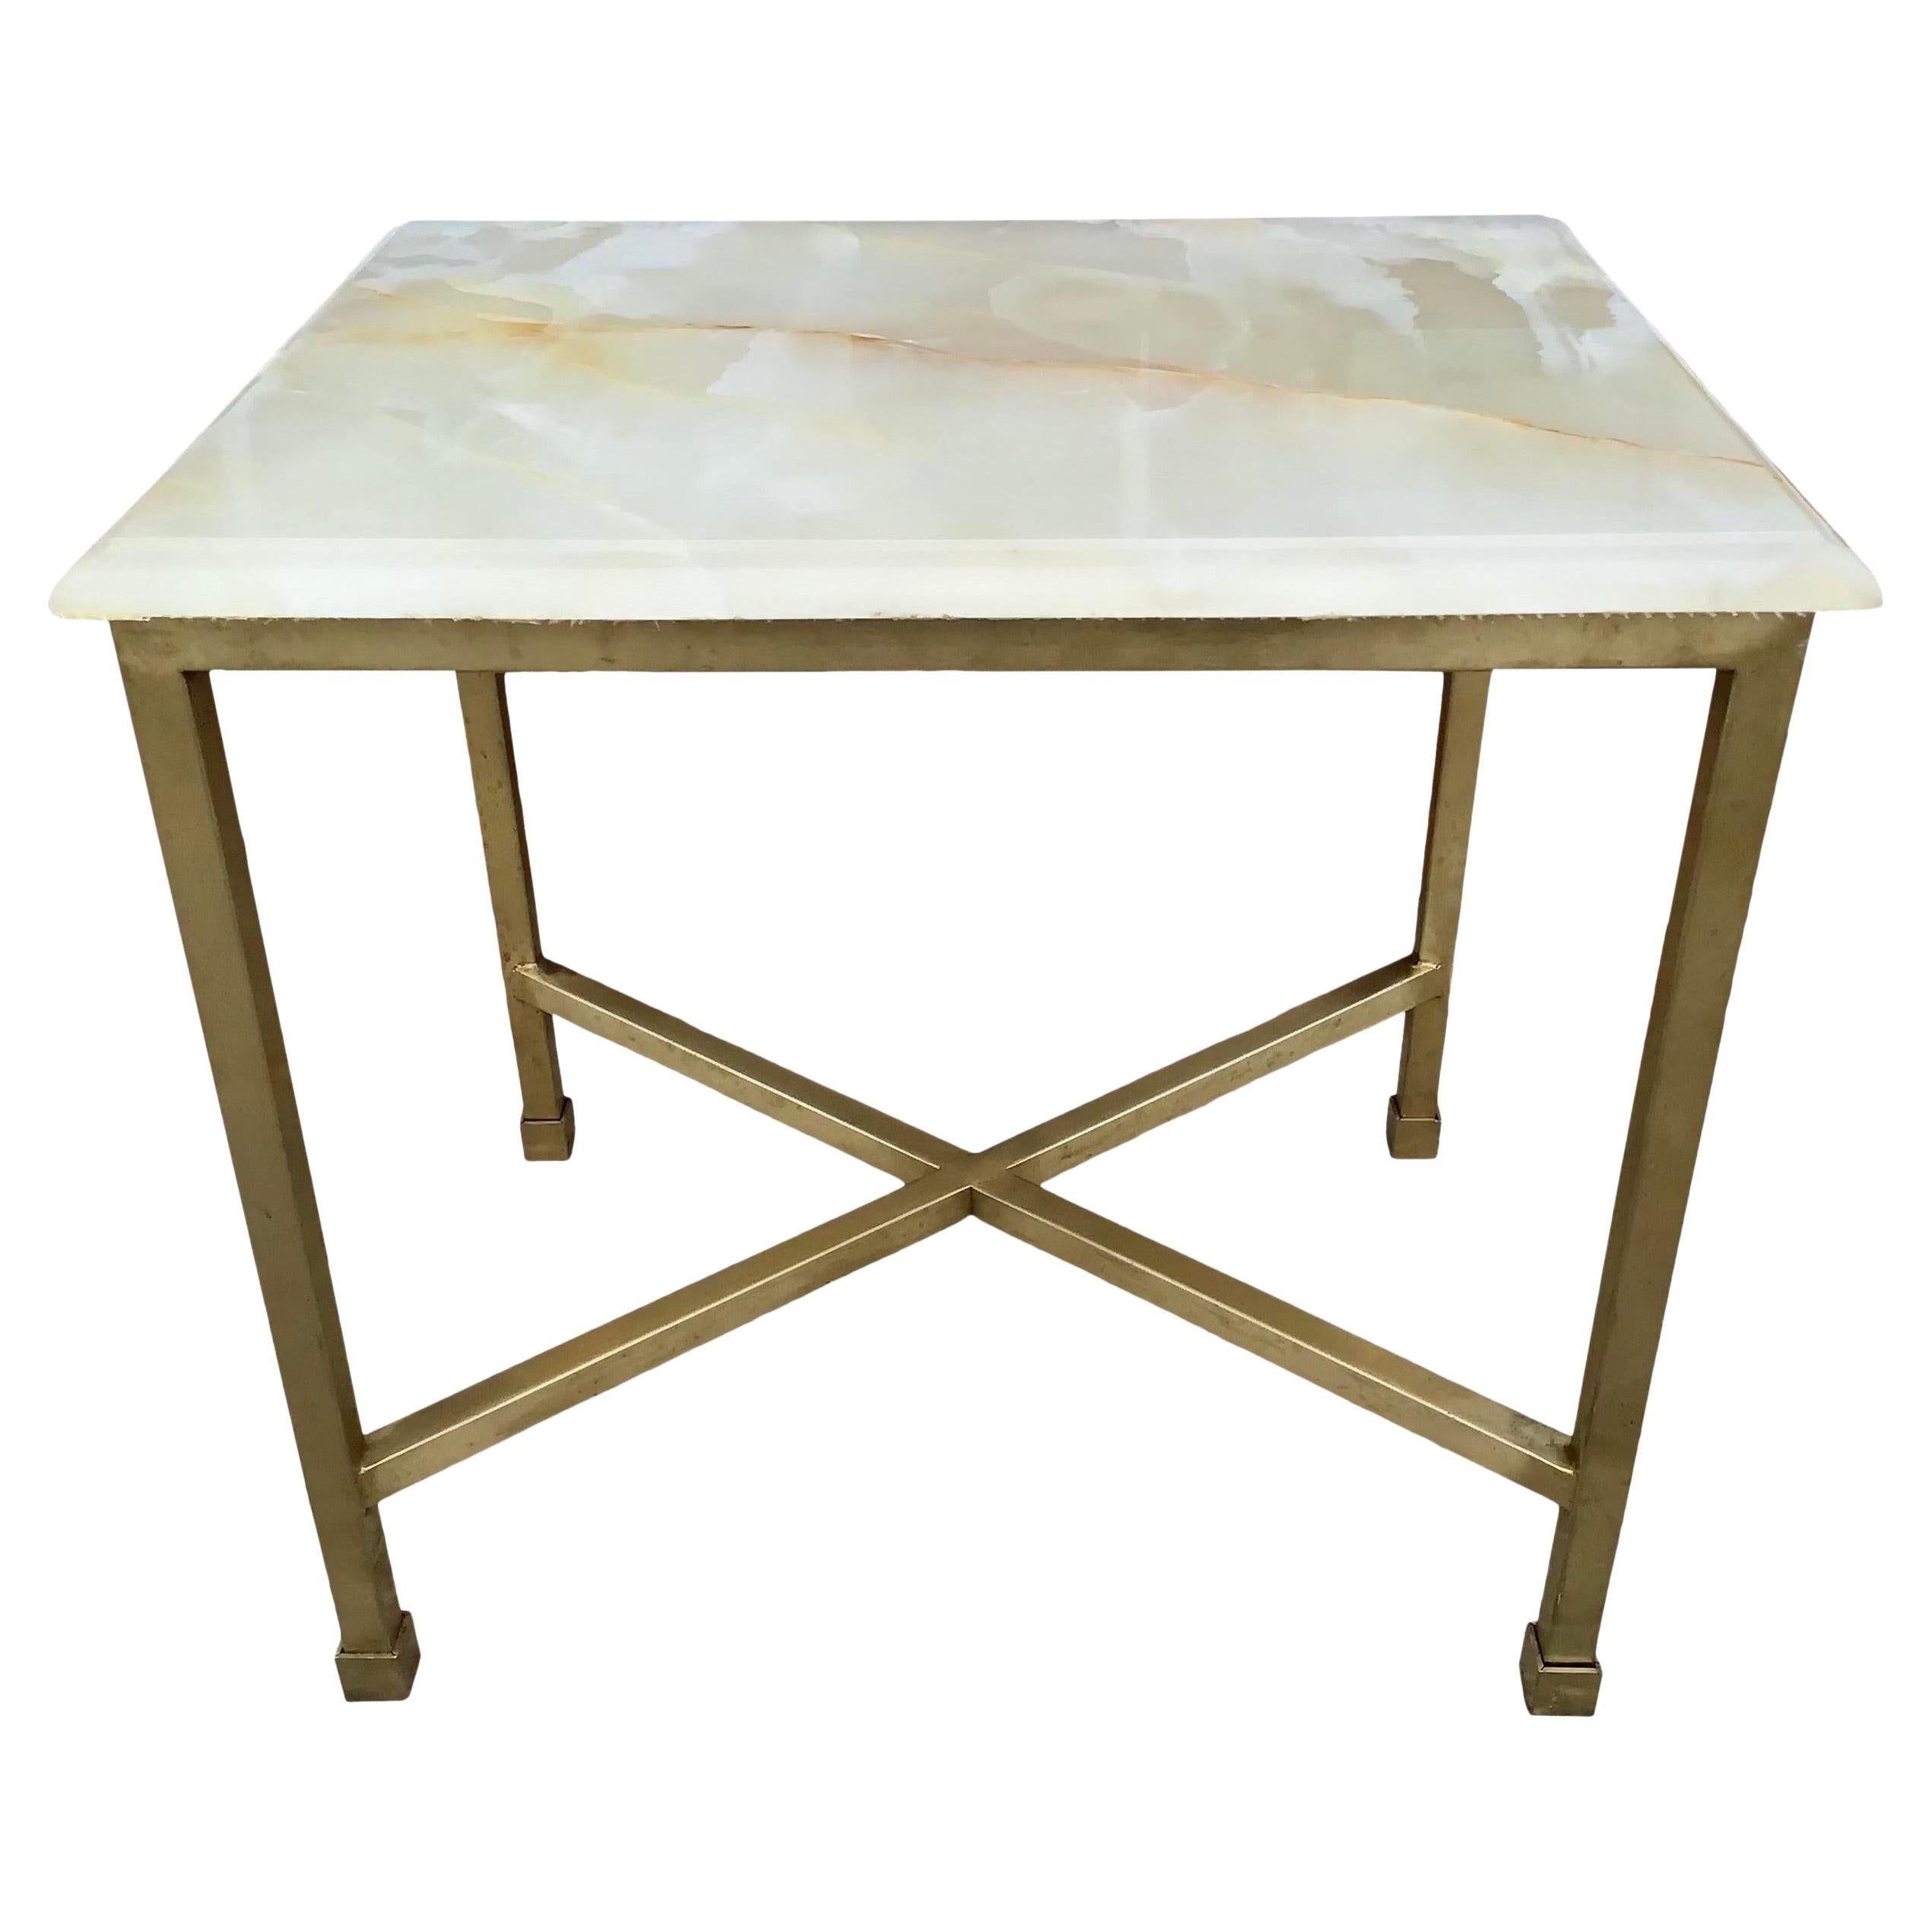 Modern Todd Hase Christelle Cocktail Table with Onyx Top